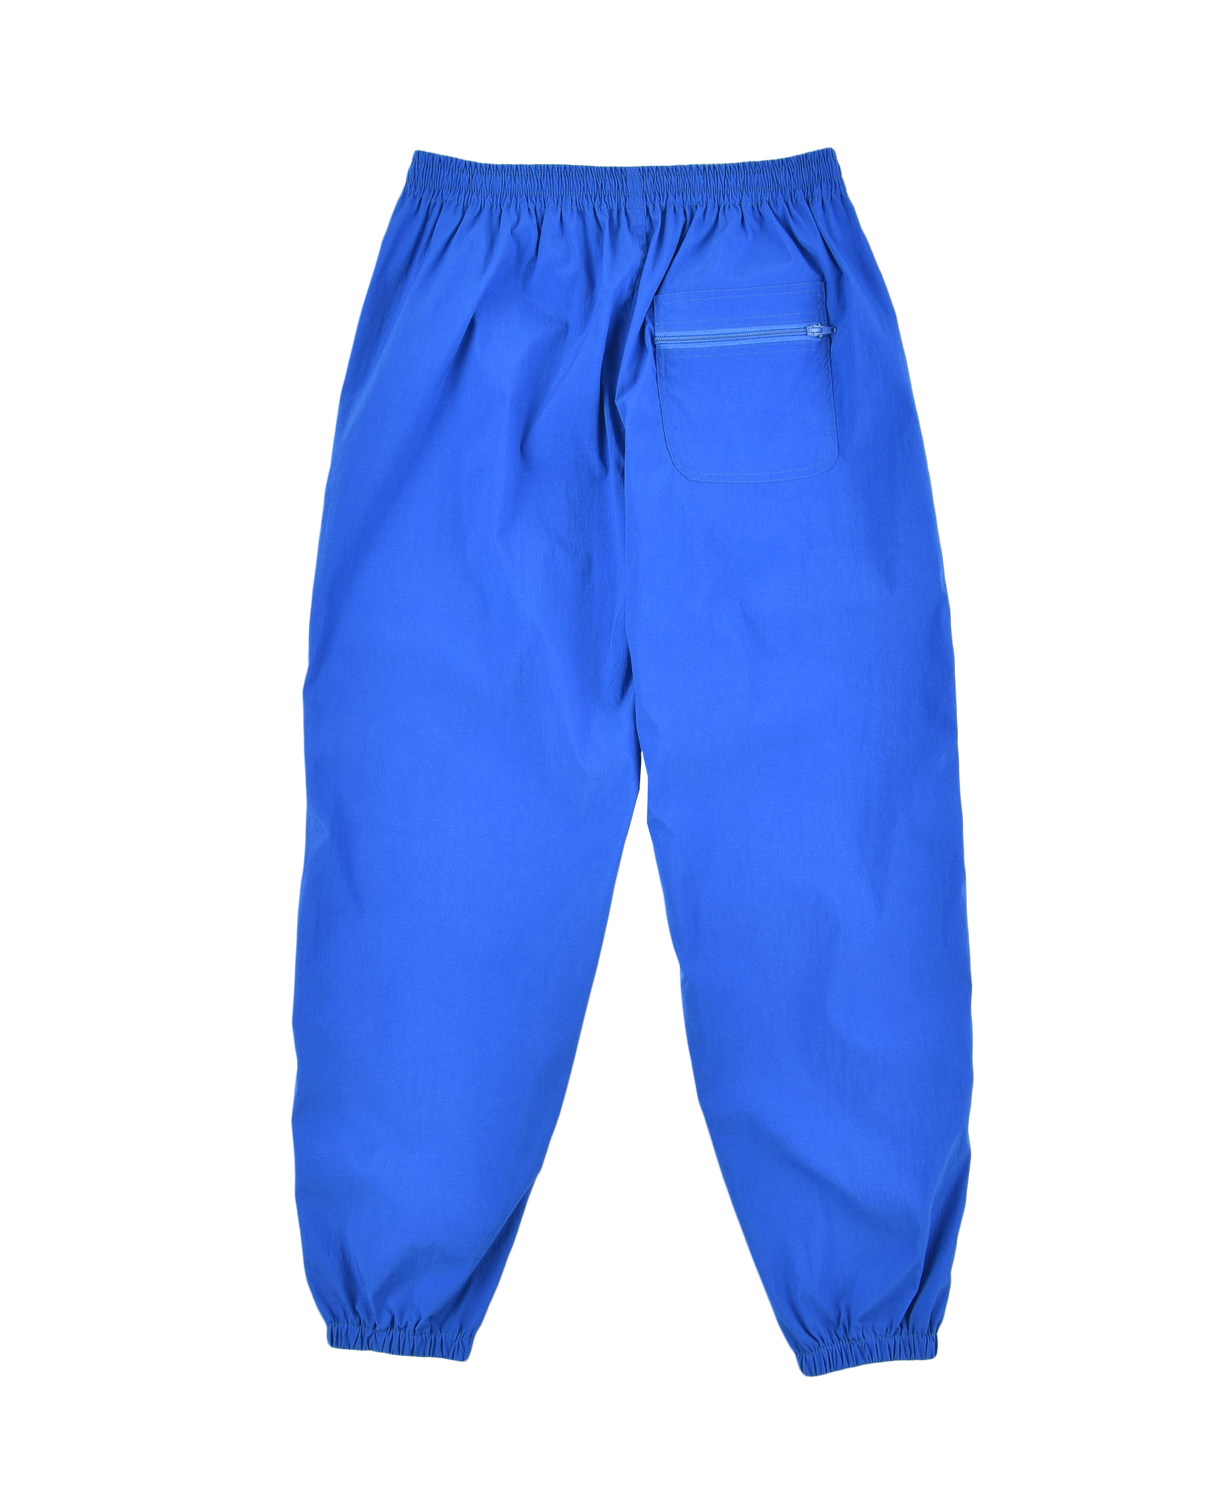 Buy Blue Track Pants for Men by ADIDAS Online | Ajio.com